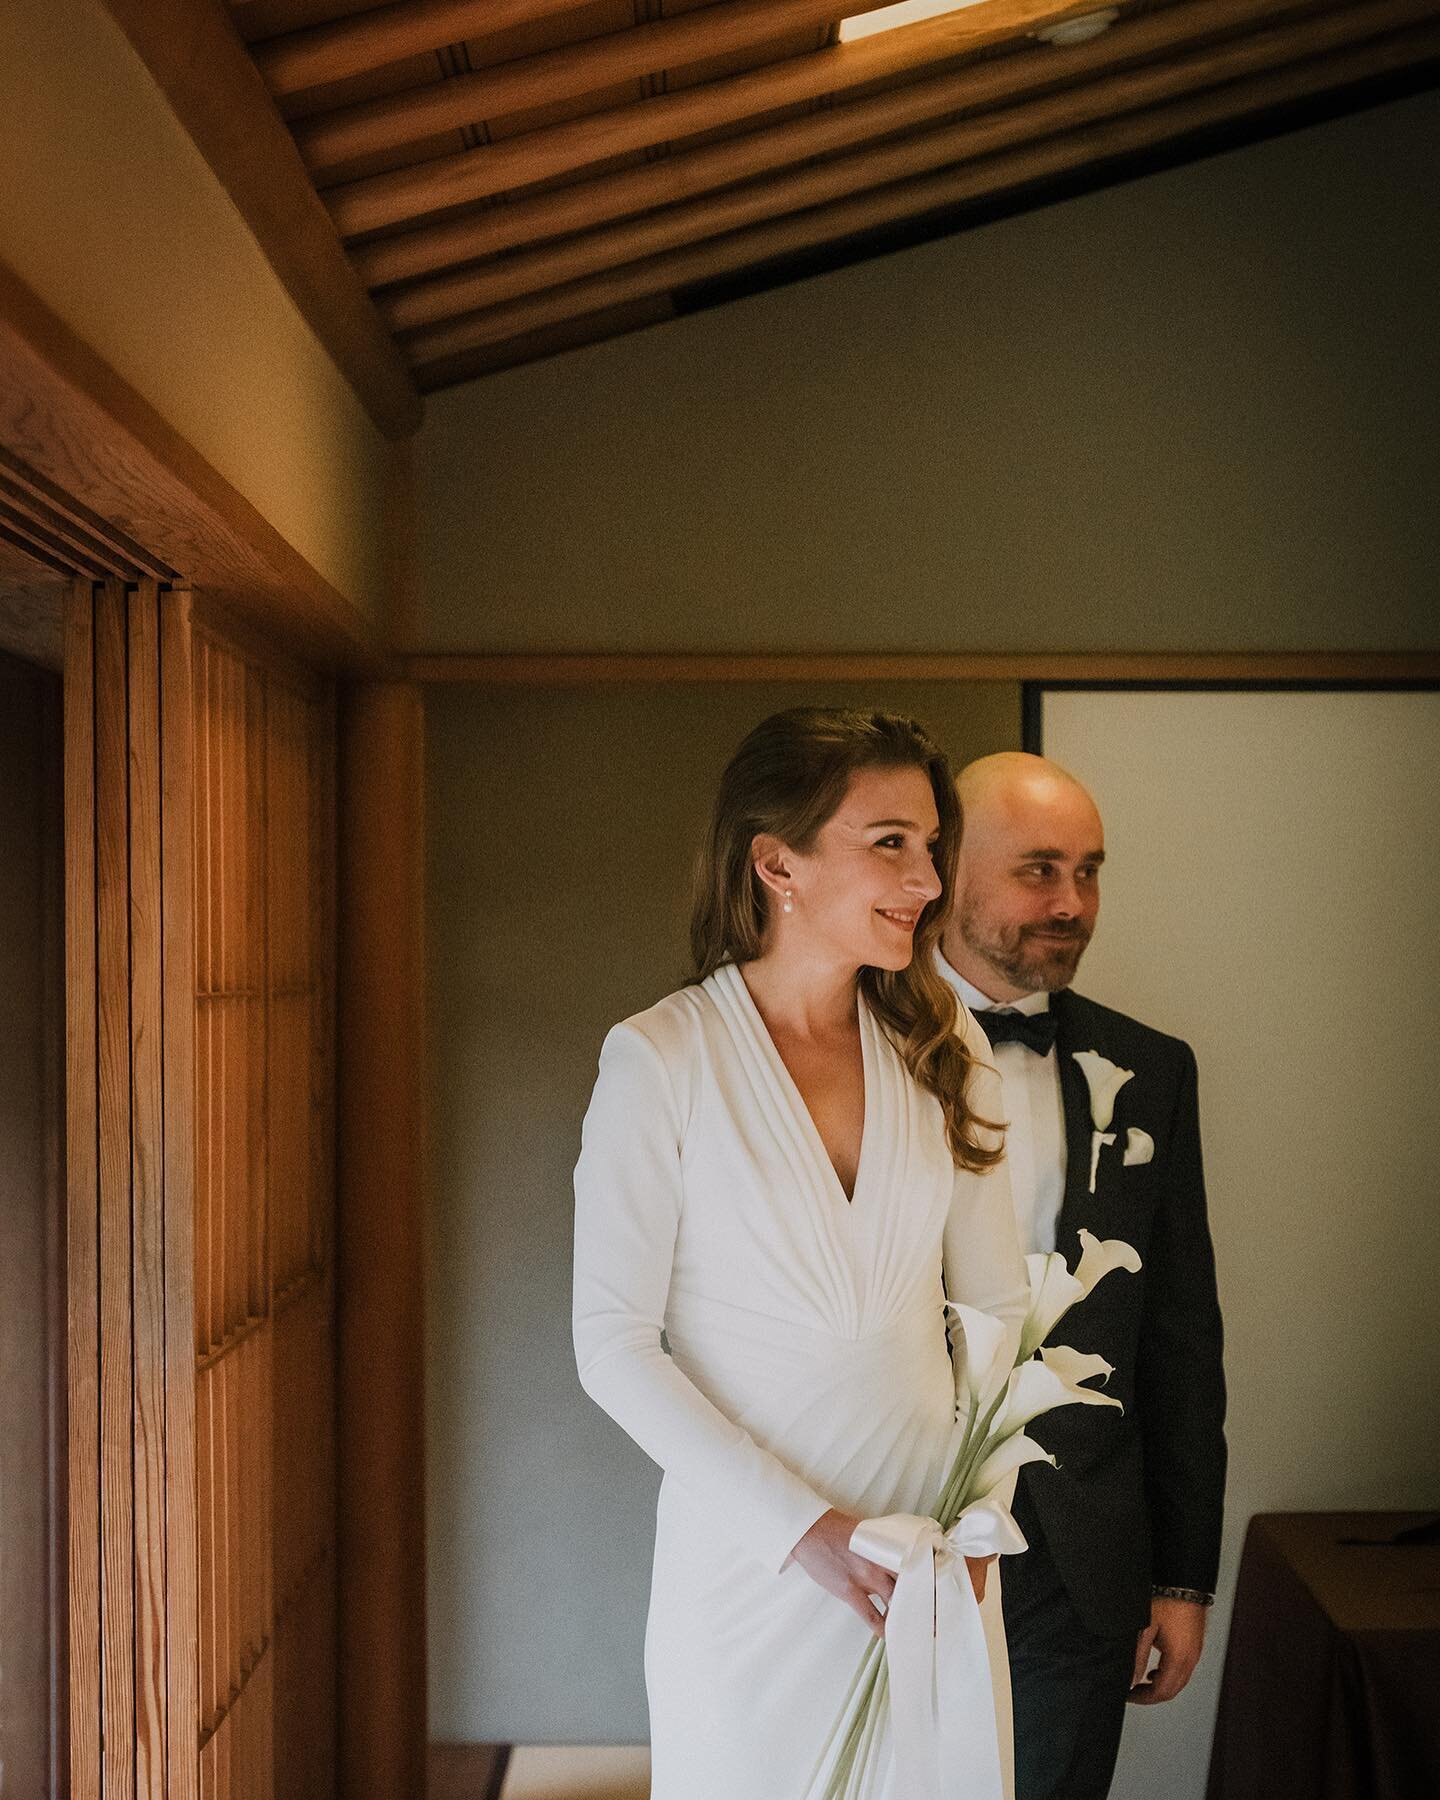 Finally sharing some sneak peeks from this beautiful tea wedding ceremony! Huge congrats and thanks to my beautiful couple and their guests who flew all the way from US. And thanks to all the people involved preparing this - you really know how to sh